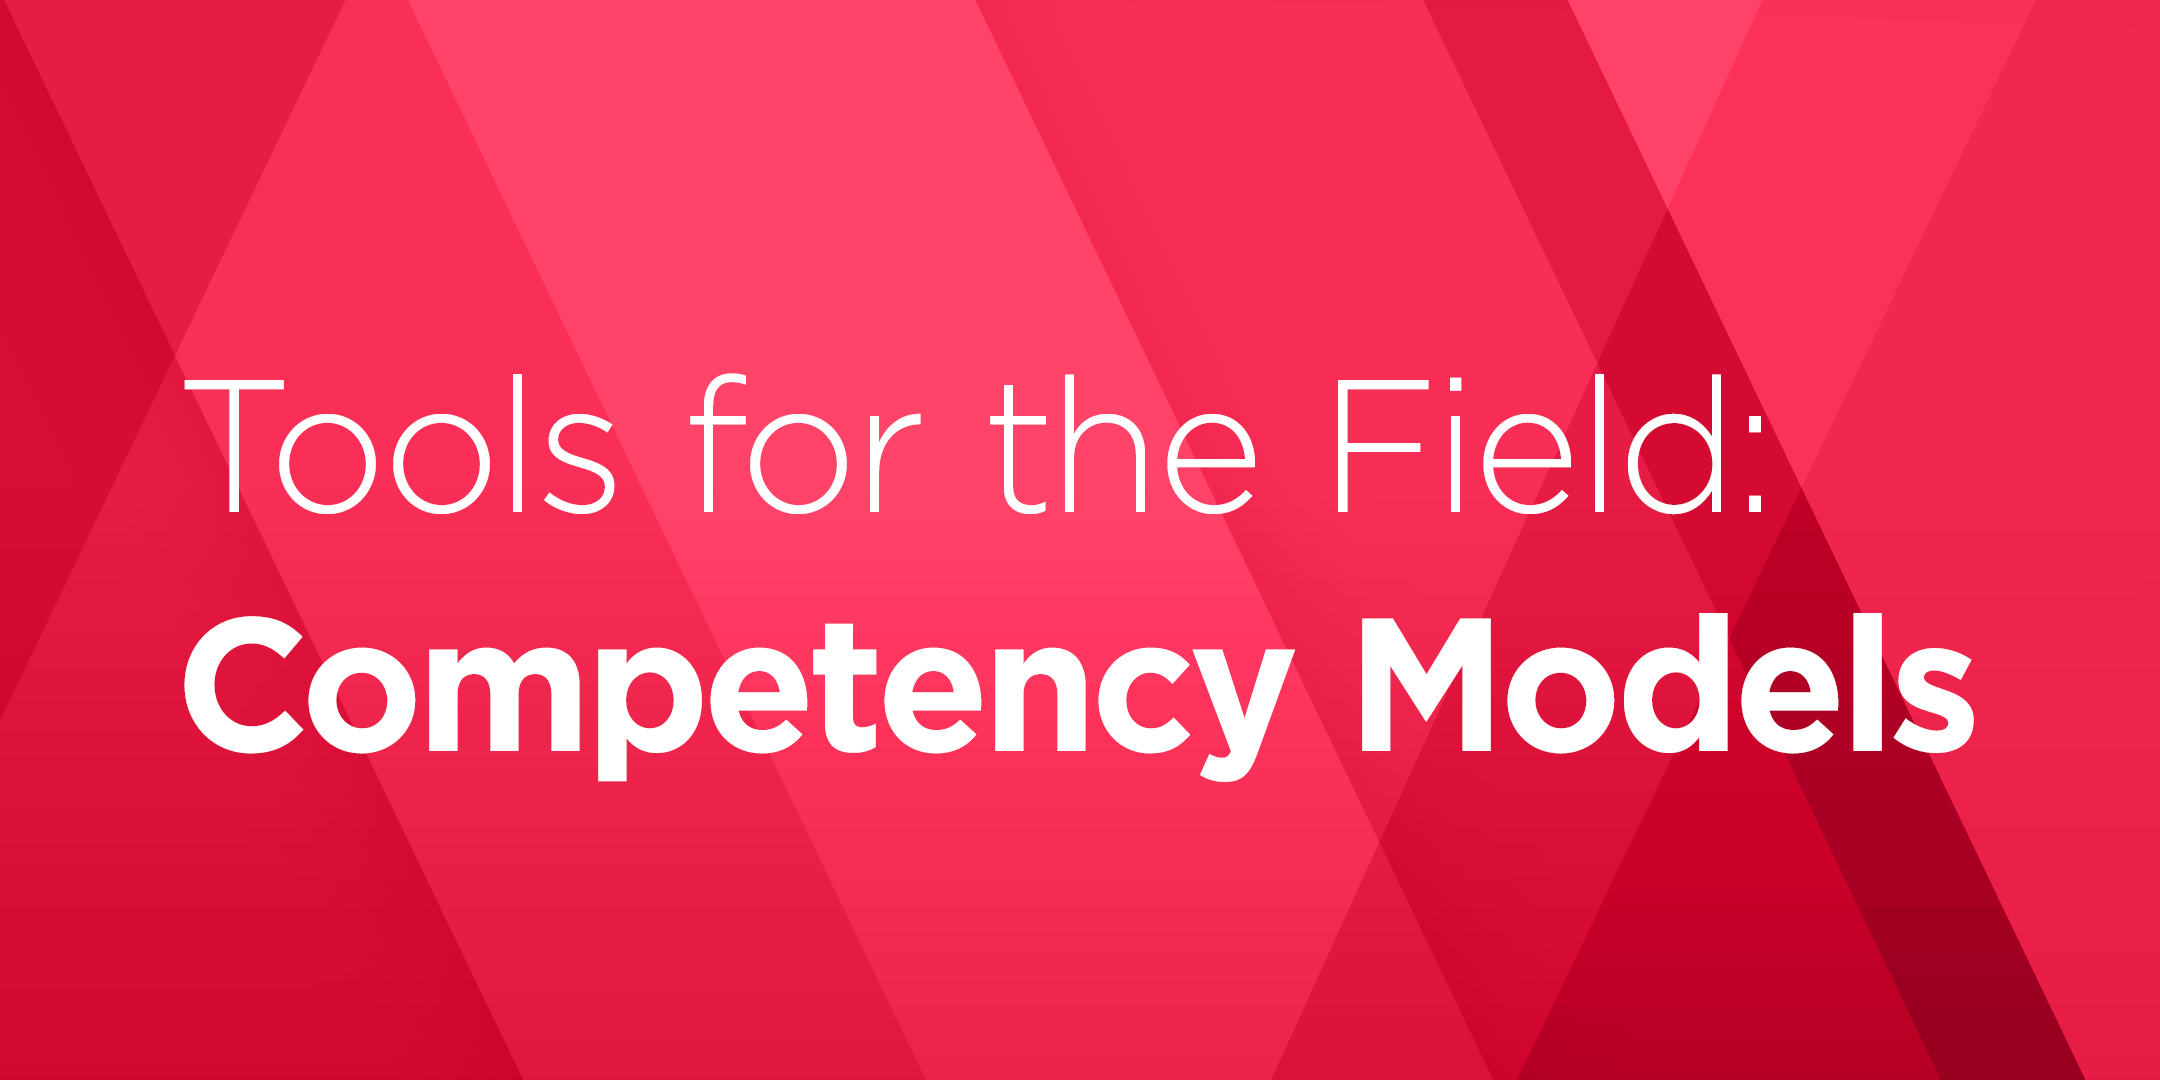 Tools for the Field: Competency Models